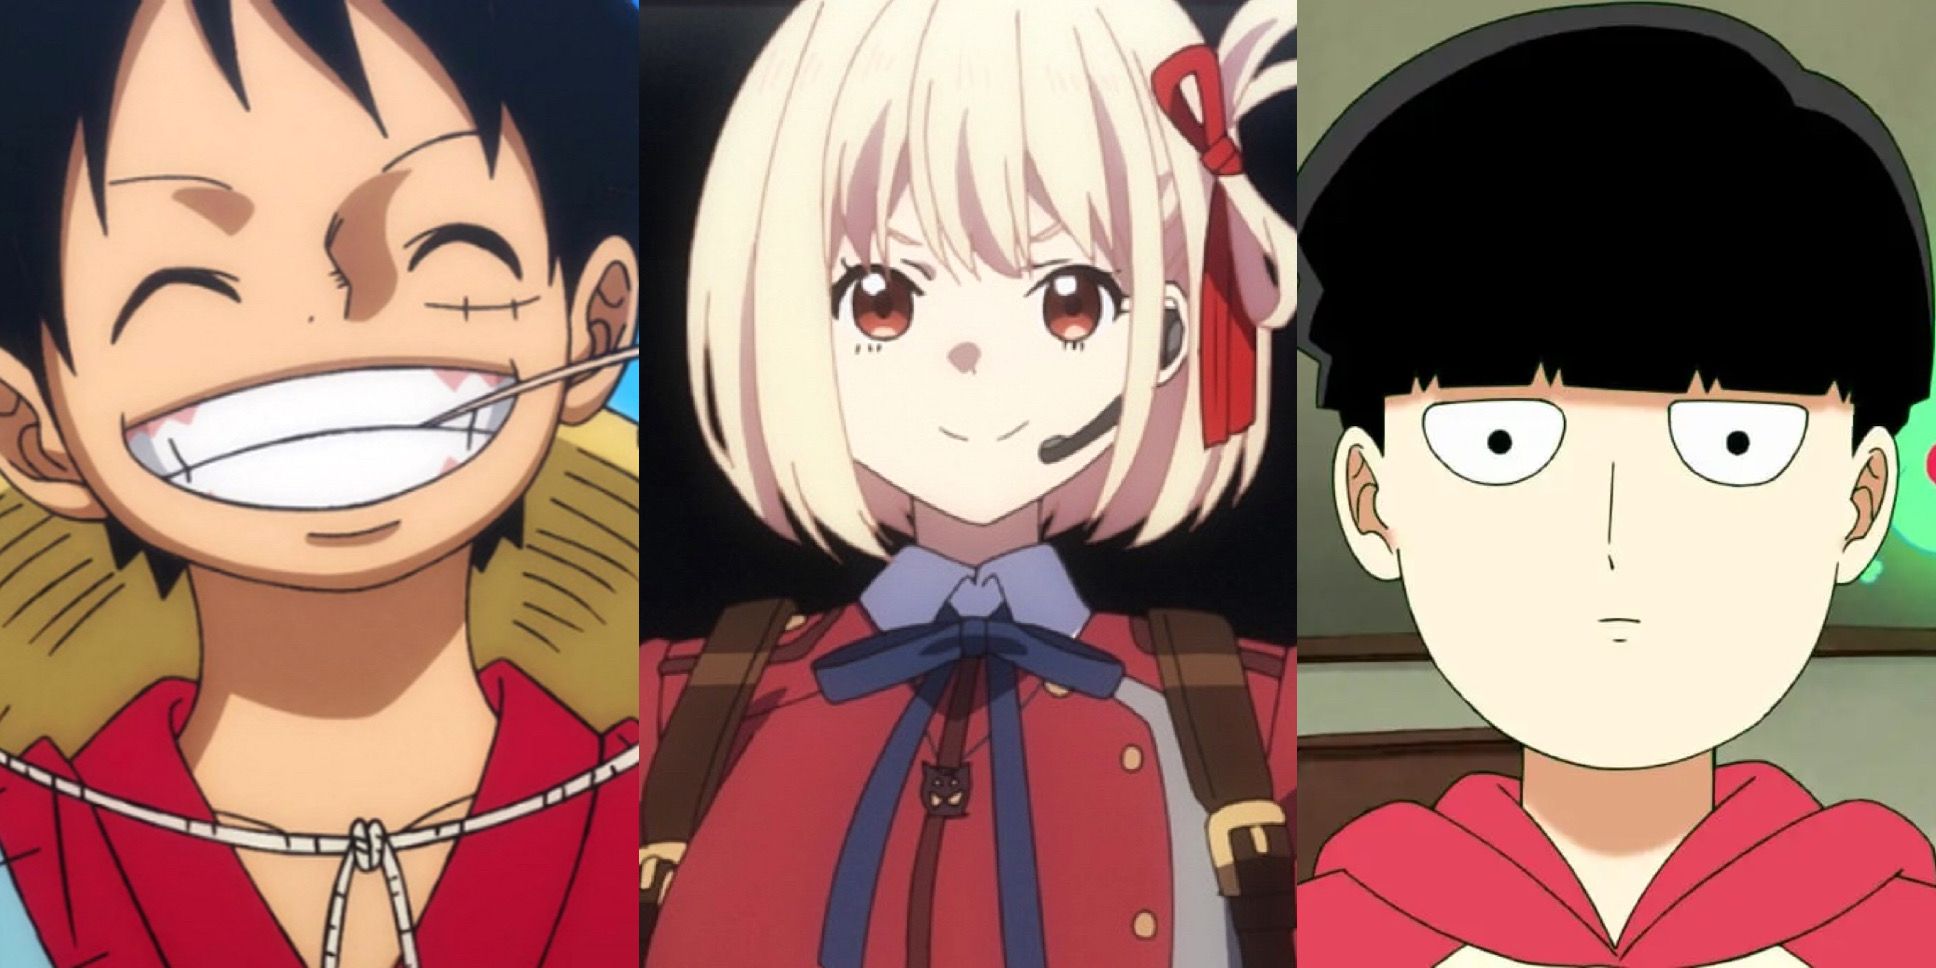 Luffy from one piece, Chisato from Lycoris recoil, mob from mob psycho 100